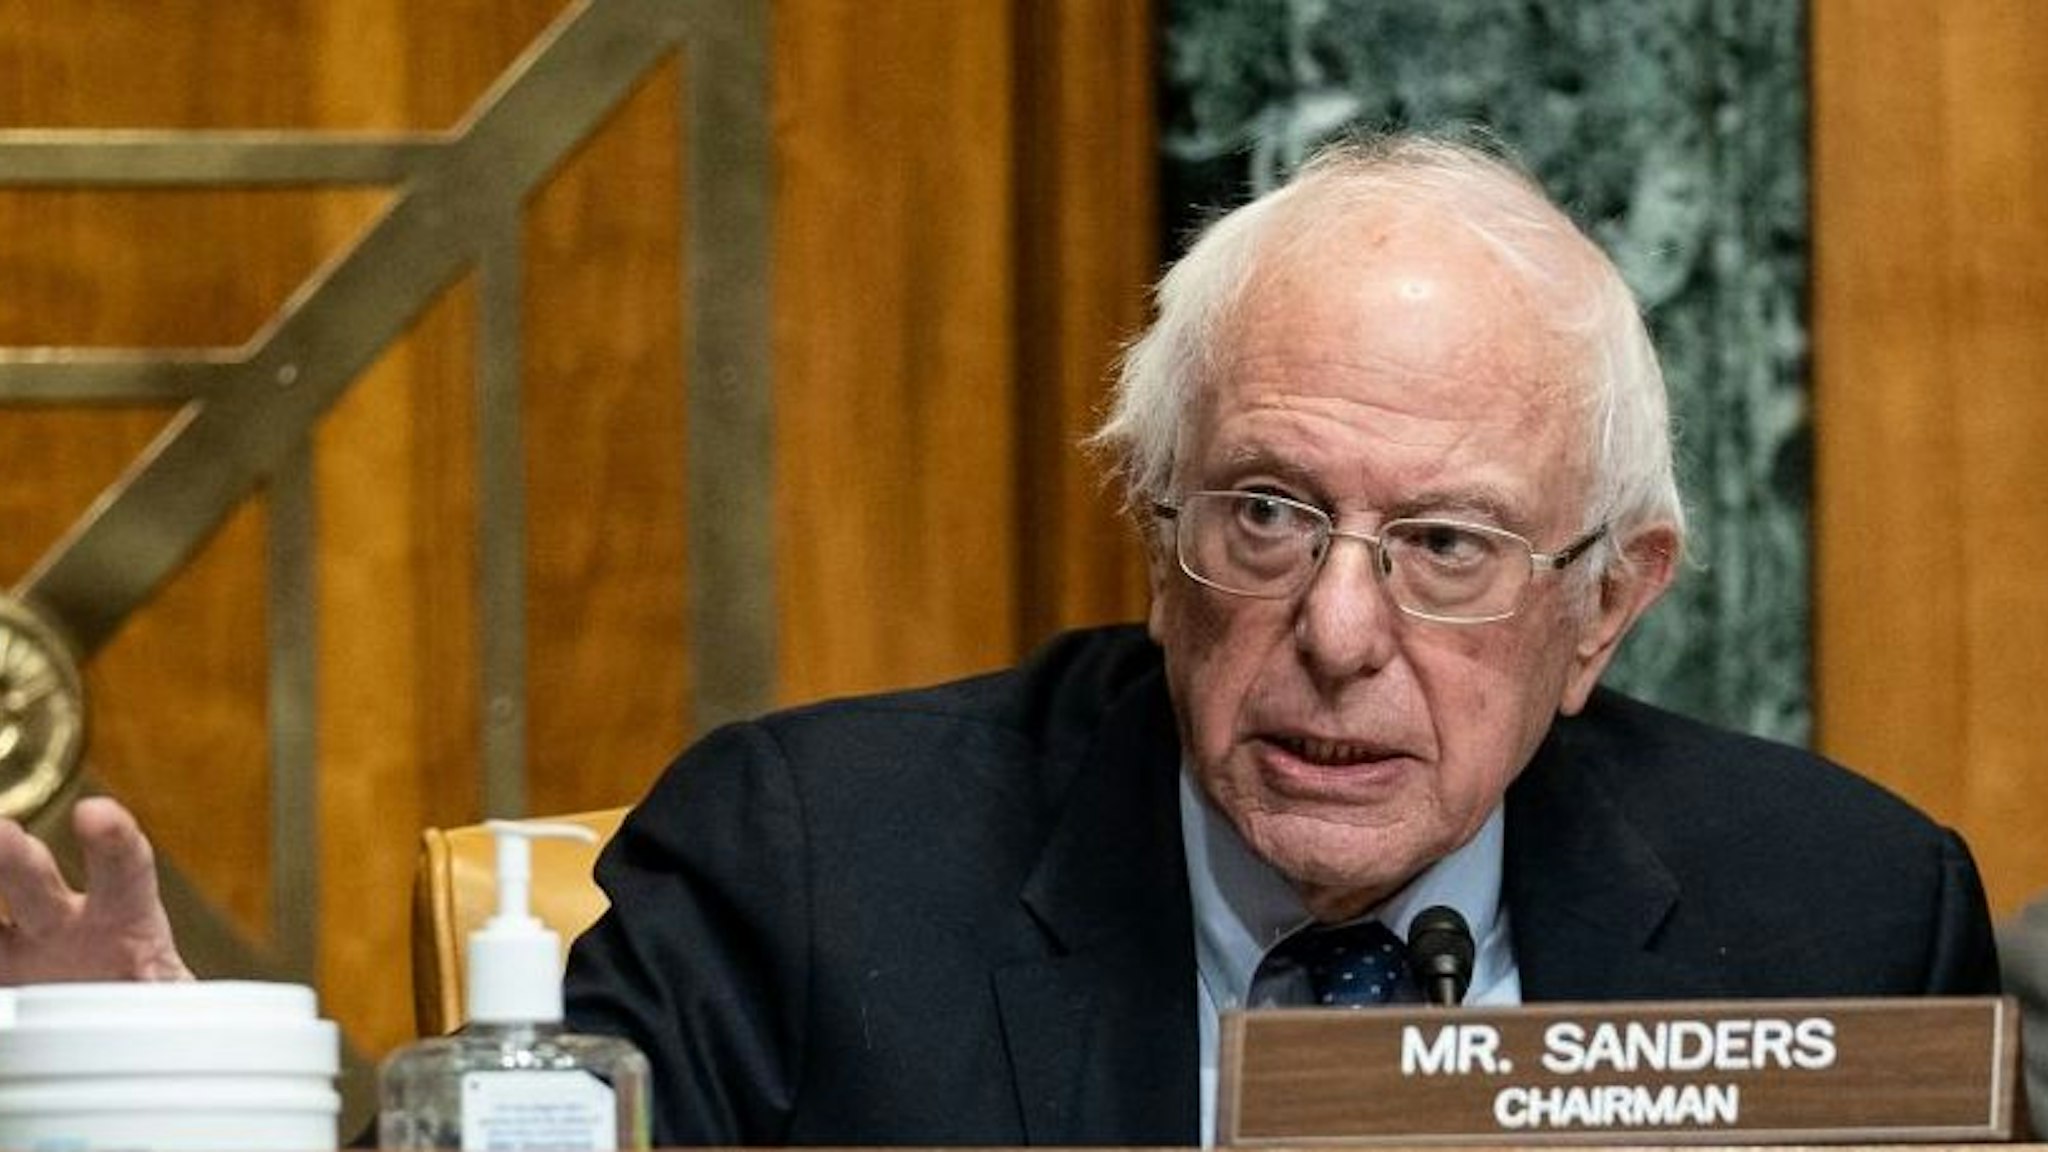 Chairman Sen. Bernie Sanders, I-VT, speaks as Neera Tanden, nominee for Director of the Office of Management and Budget (OMB), testifies during a Senate Committee on the Budget hearing on Capitol Hill in Washington, DC on February 10, 2021.